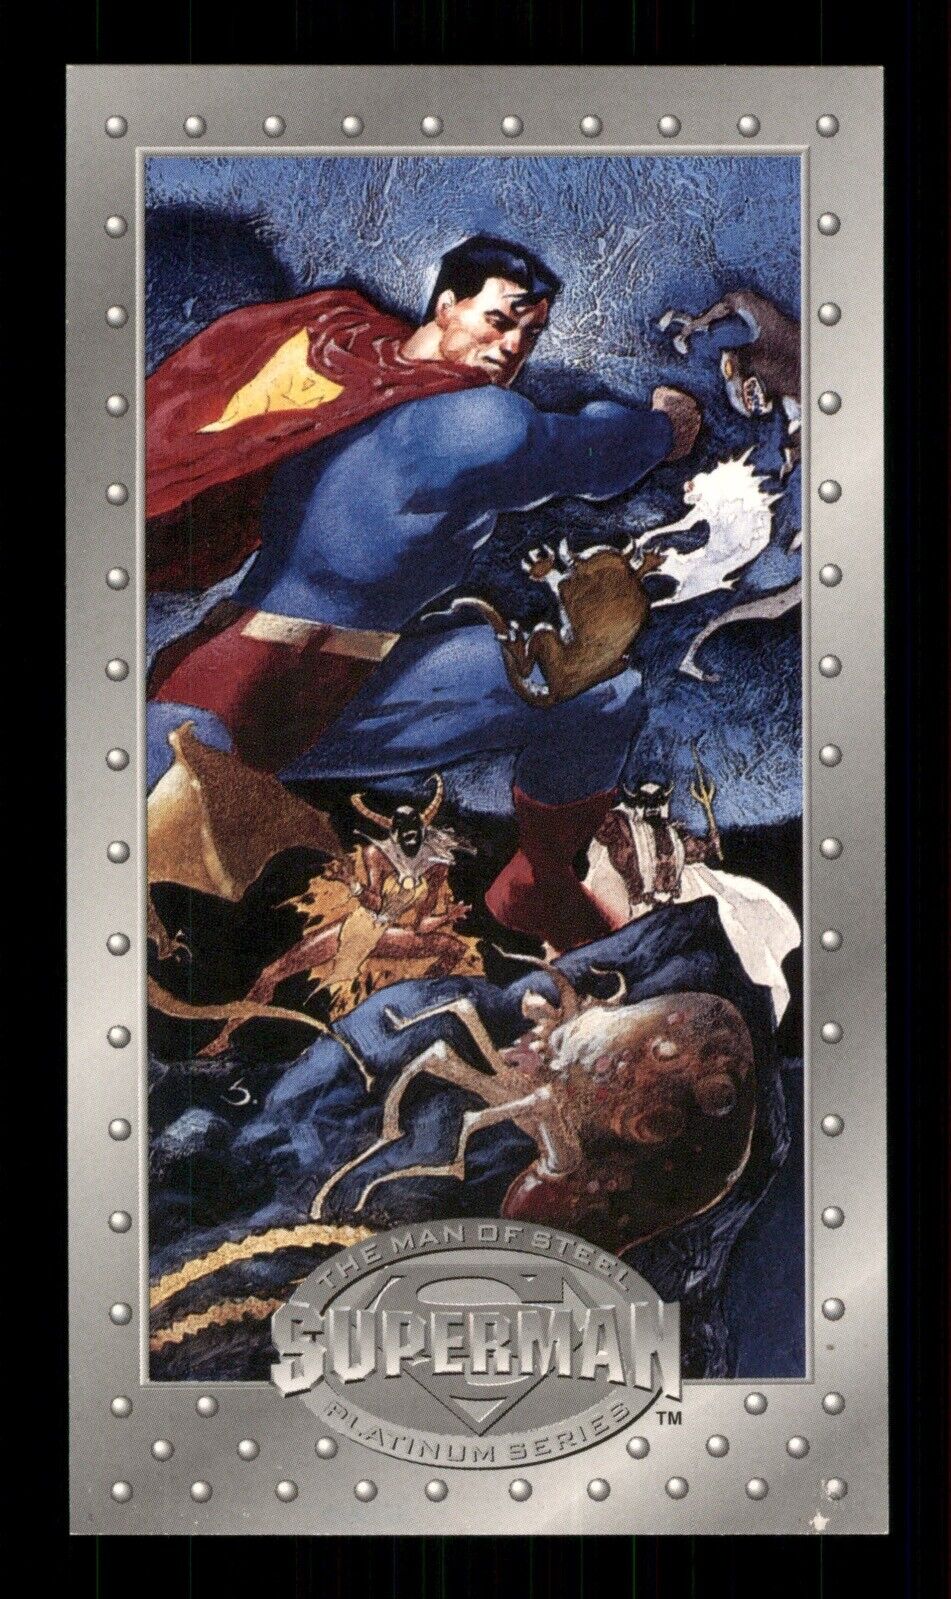 Caught In The Middle 66 Superman SkyBox Trading Card TCG CCG